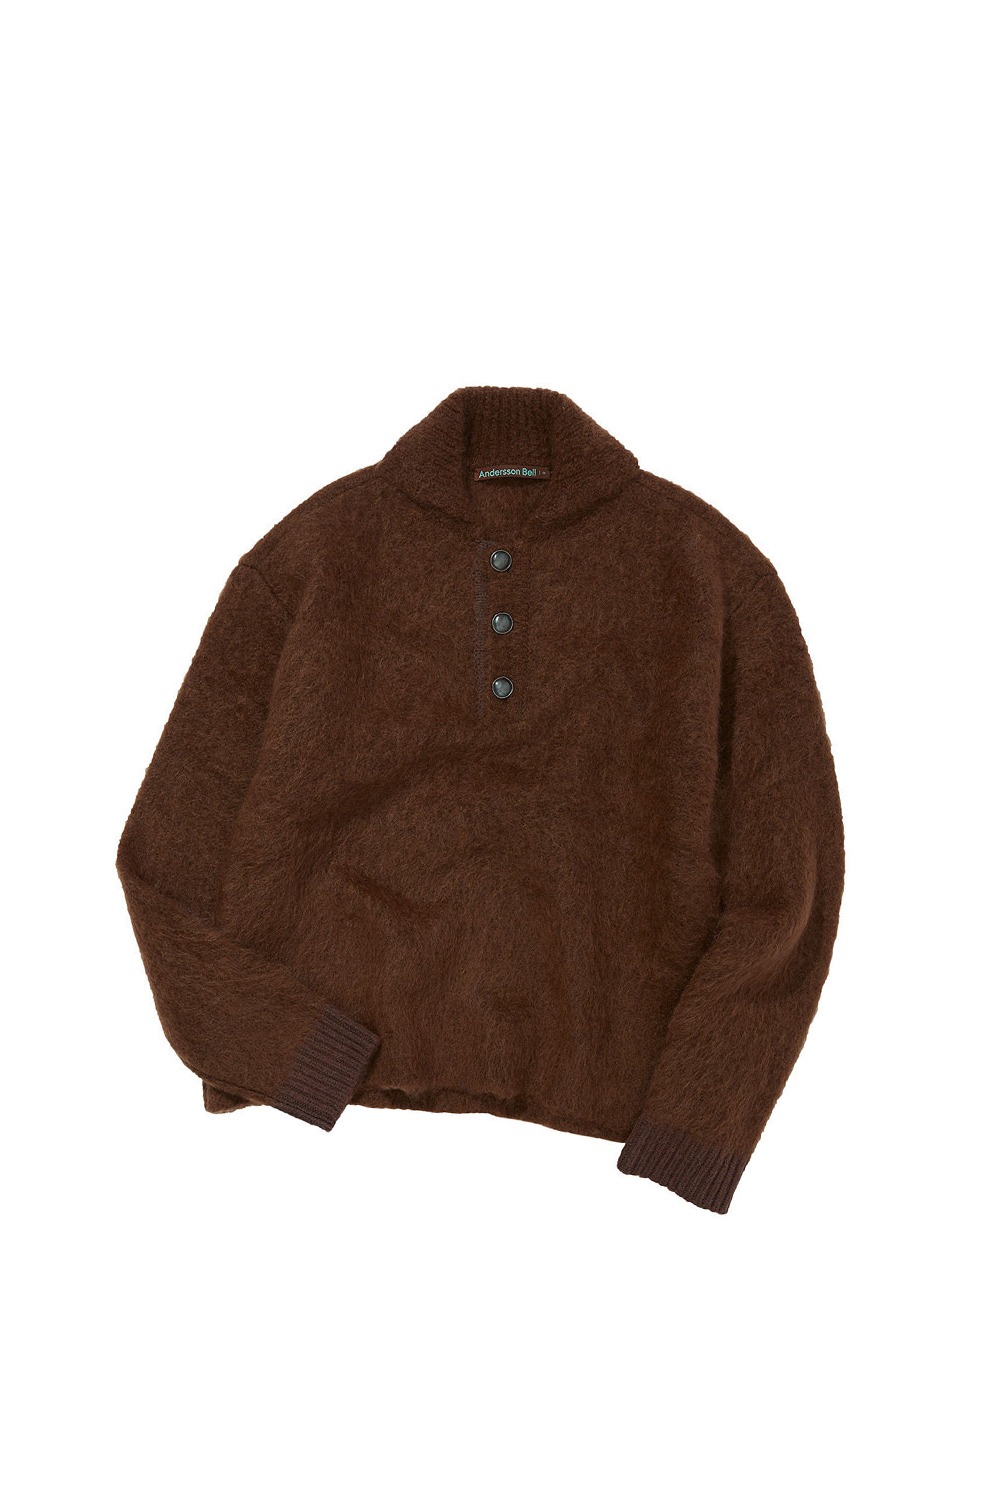 CHATTERIS BRUSHED POLO SWEATER atb787m